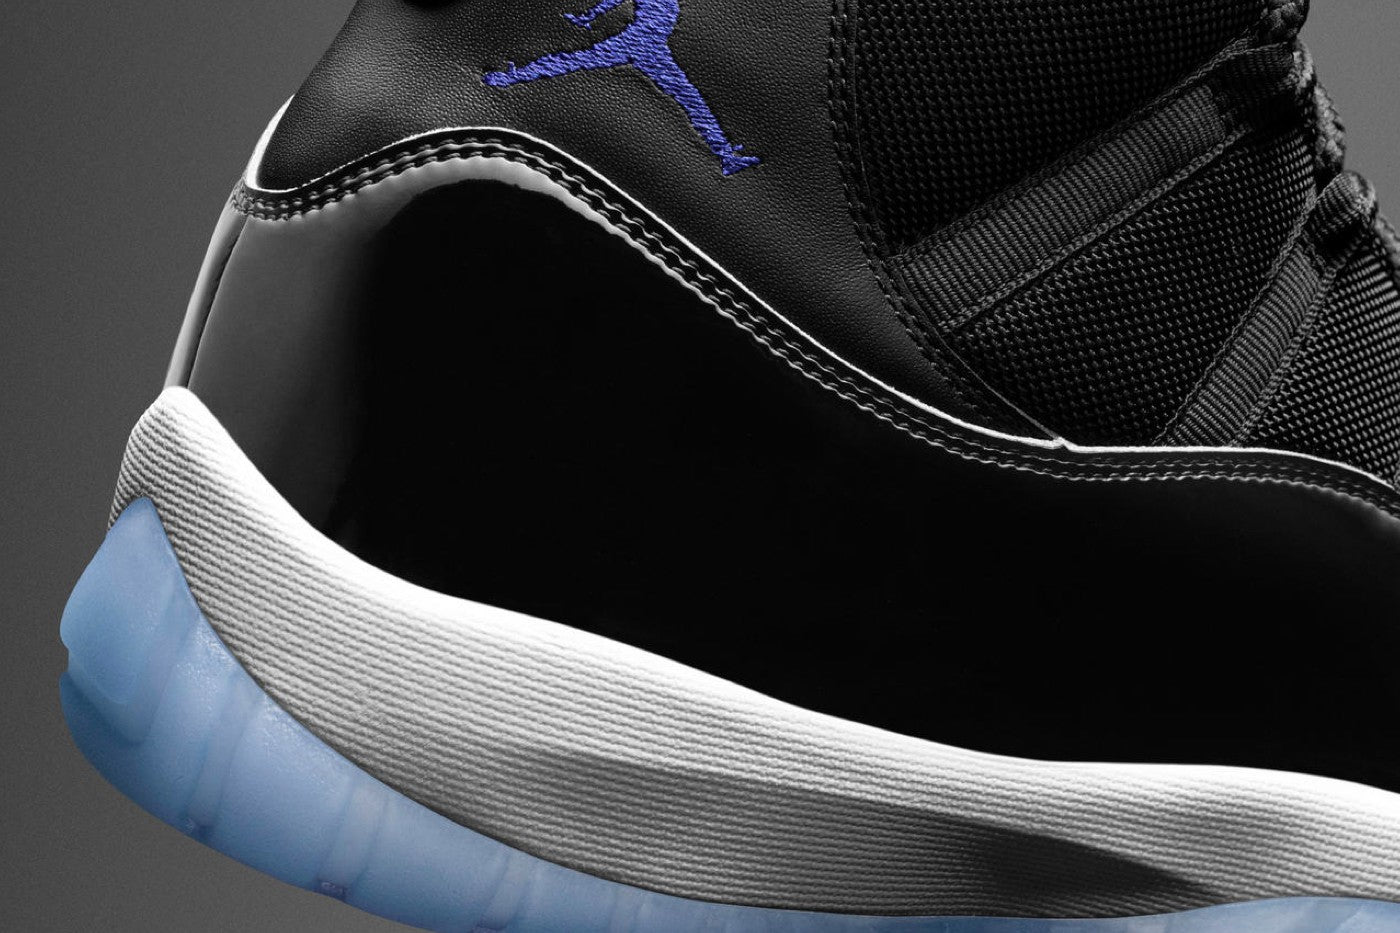 Everything We Know So Far About the Air Jordan 11 Low "Space Jam"